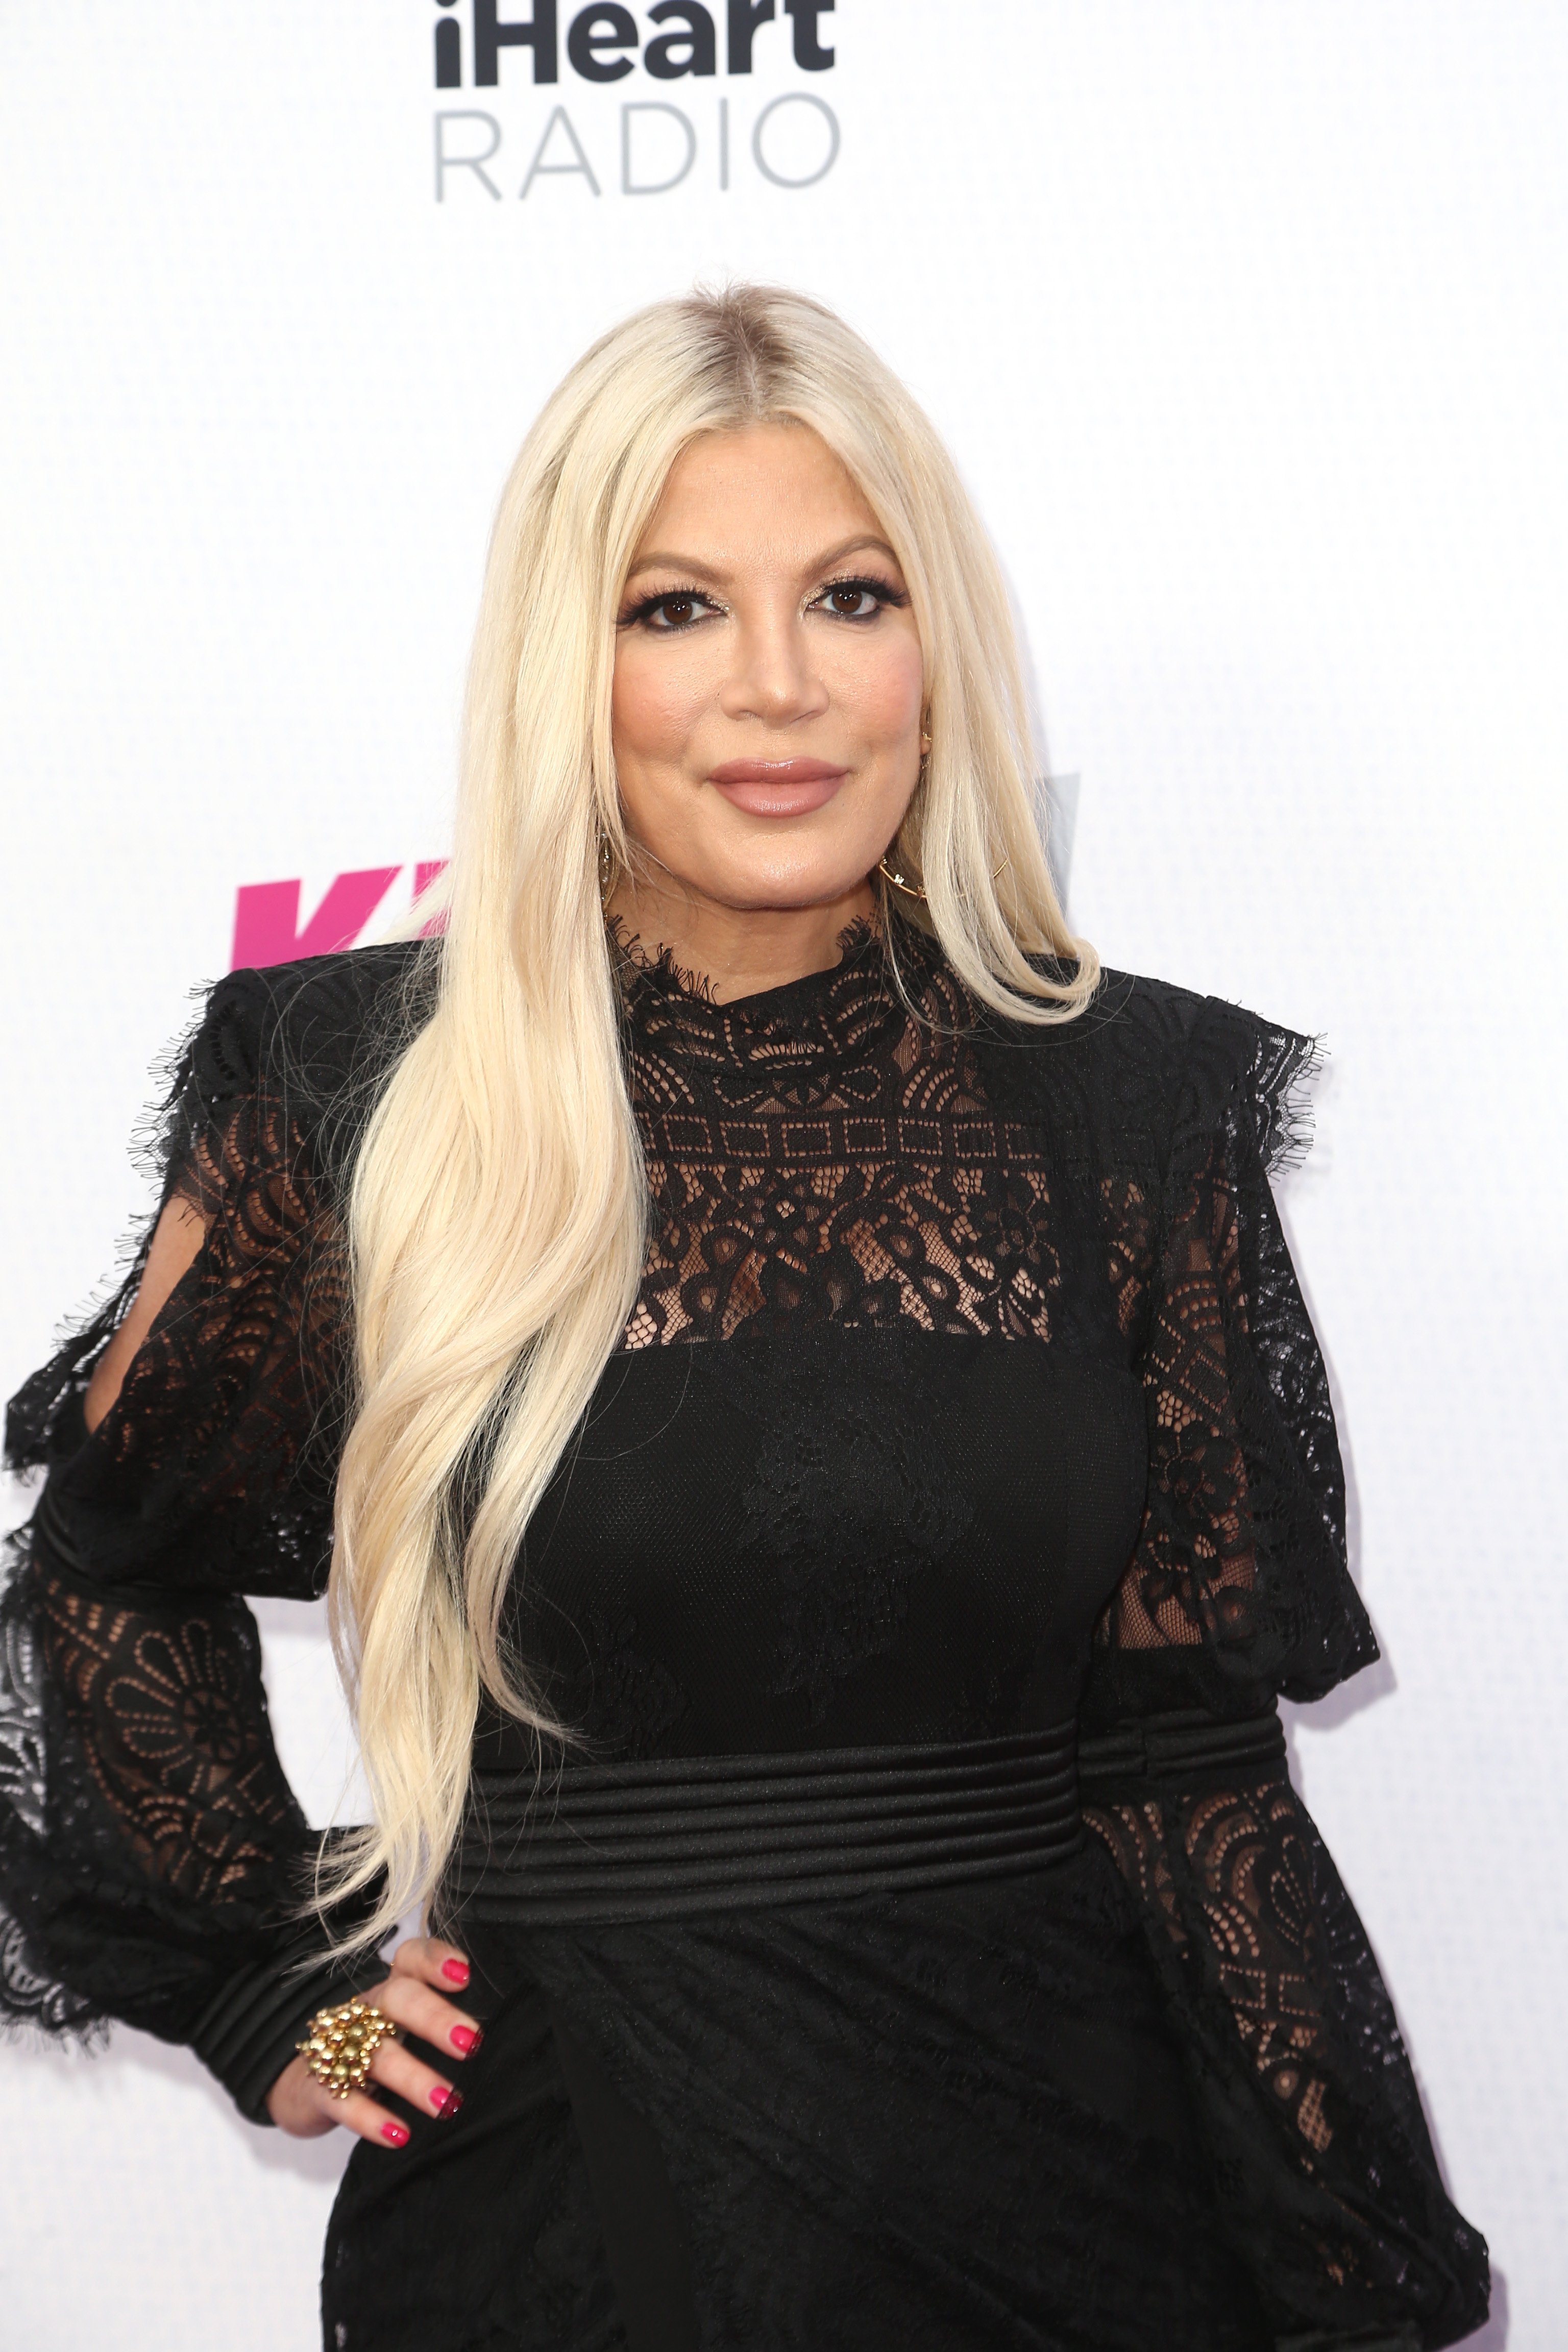 Tori Spelling attends the 2022 iHeartRadio Wango Tango at Dignity Health Sports Park on June 04, 2022 in Carson, California. | Source: Getty Images